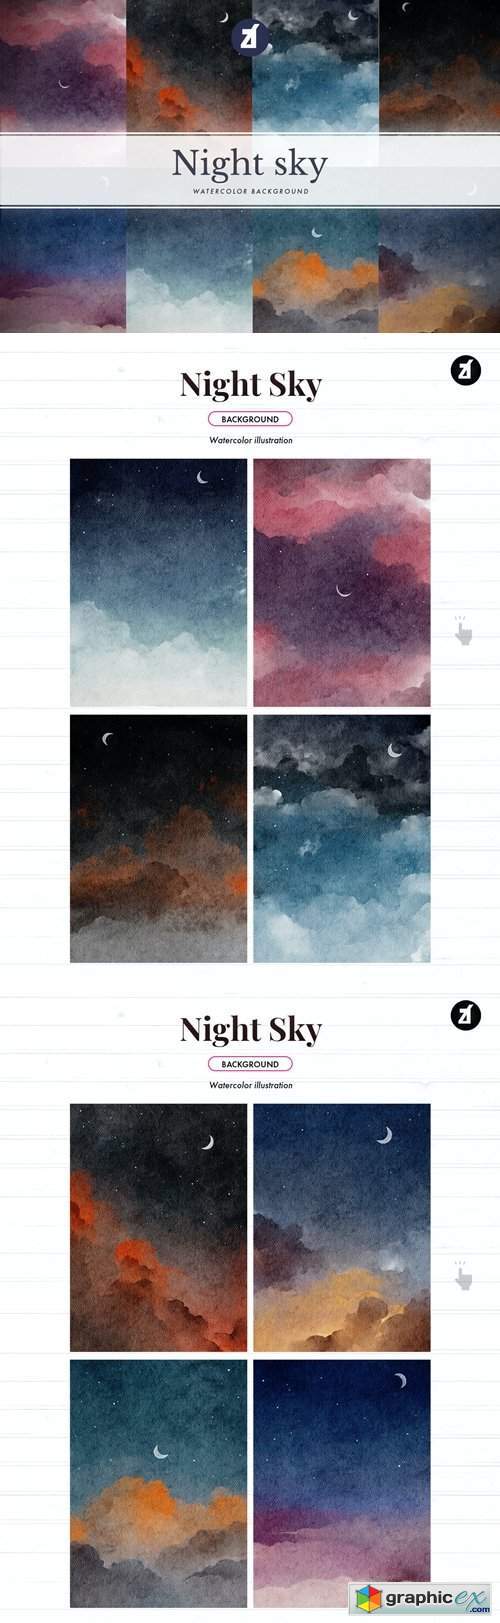 8 Night sky watercolor background